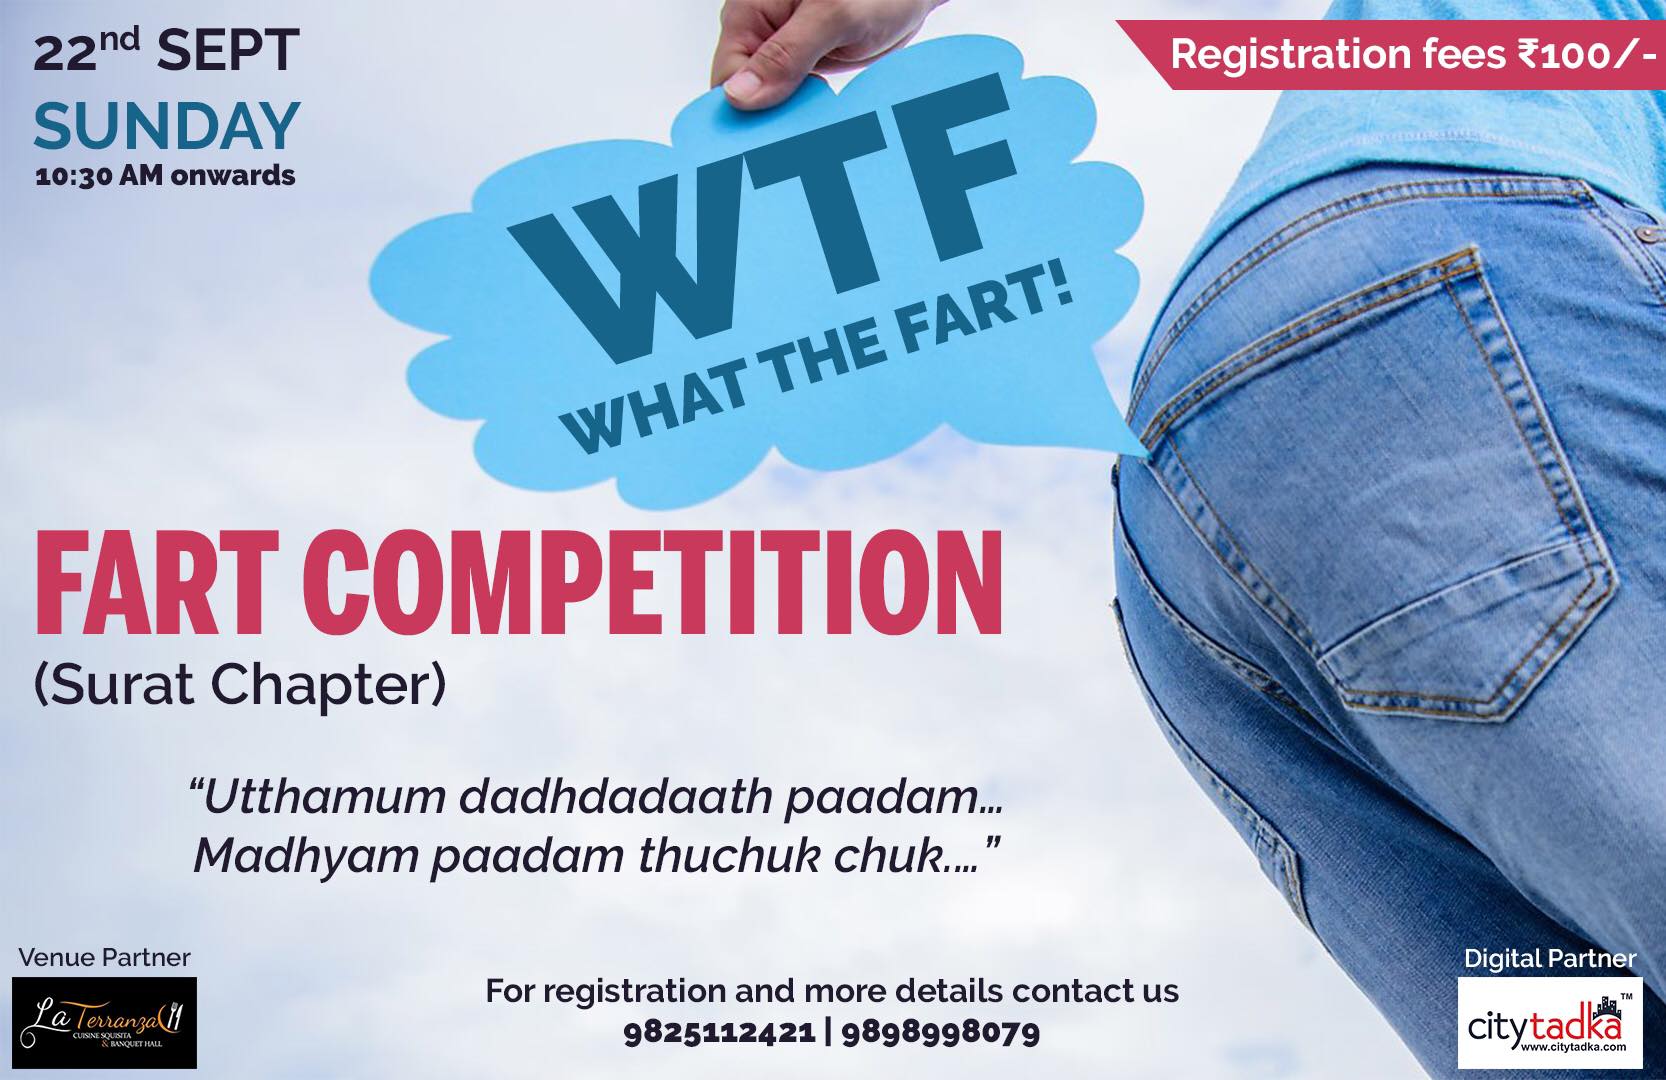 World Farting Contest